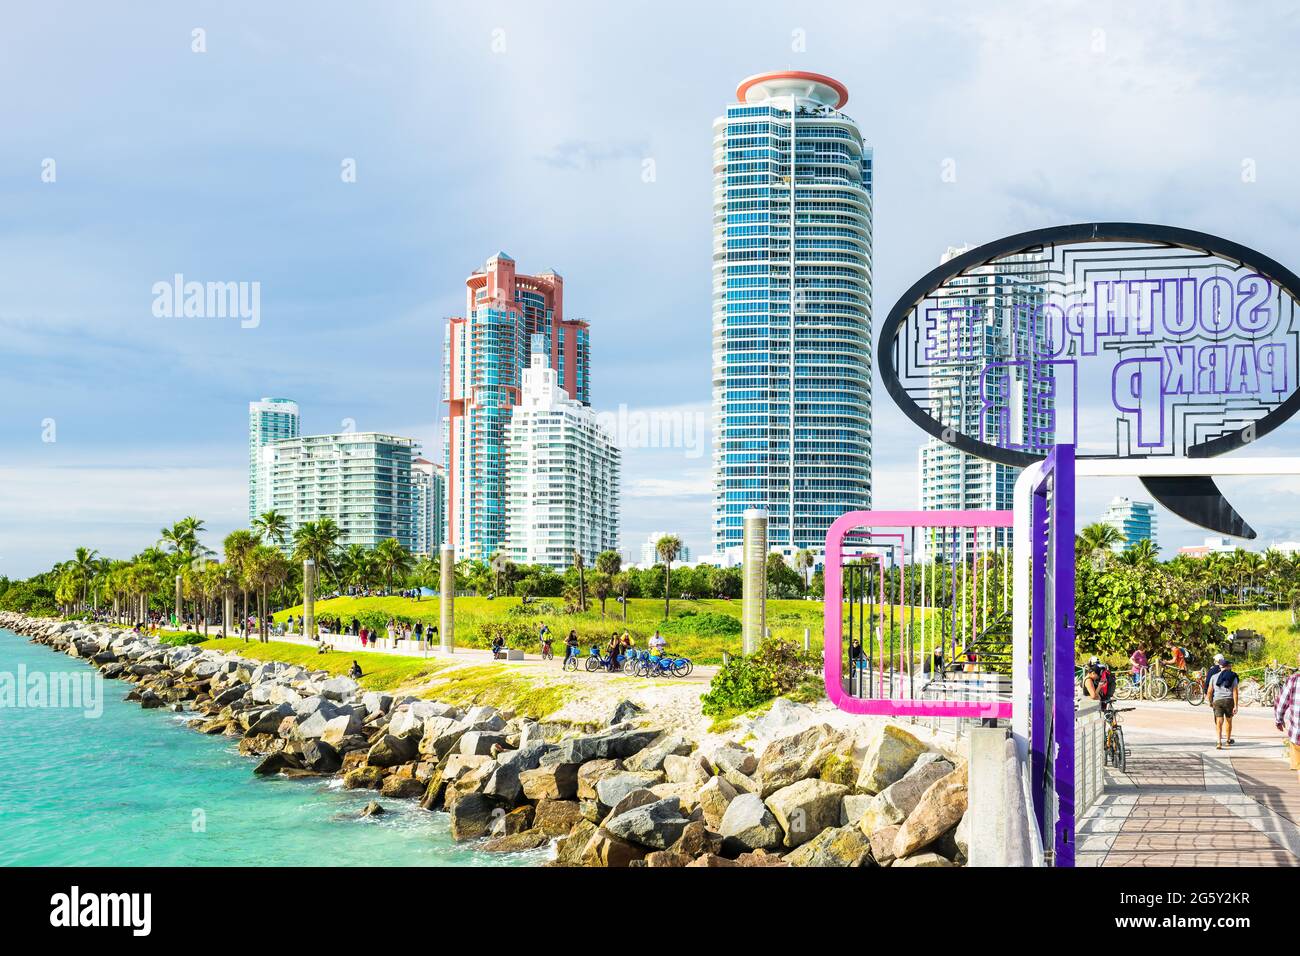 Miami Beach, USA - January 17, 2021: South beach Lummus Park and coast waterfront buildings and sign entrance for south pointe park pier on south end Stock Photo